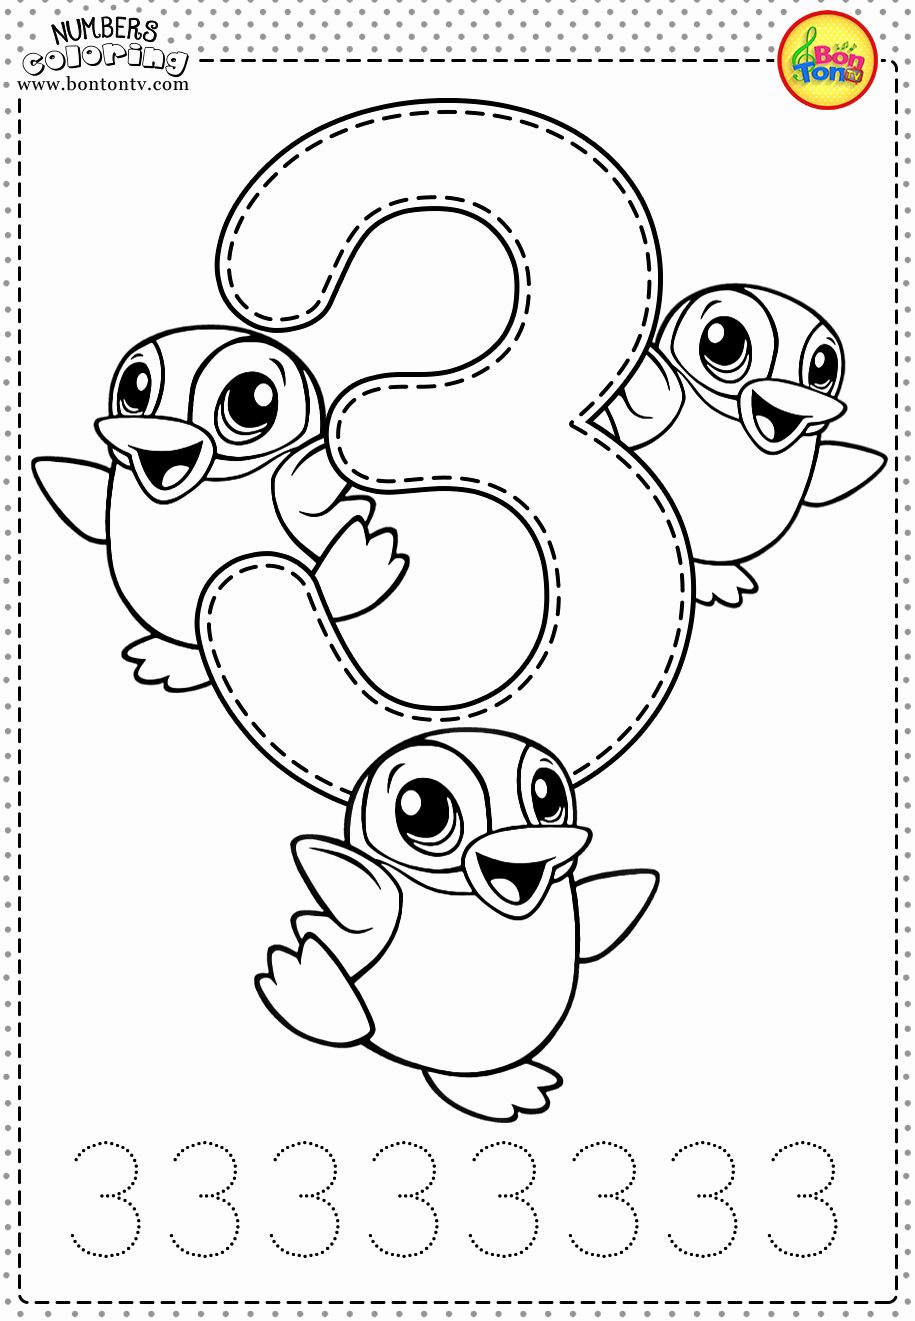 Coloring Math Activities For Preschoolers Coloring Pages Gallery